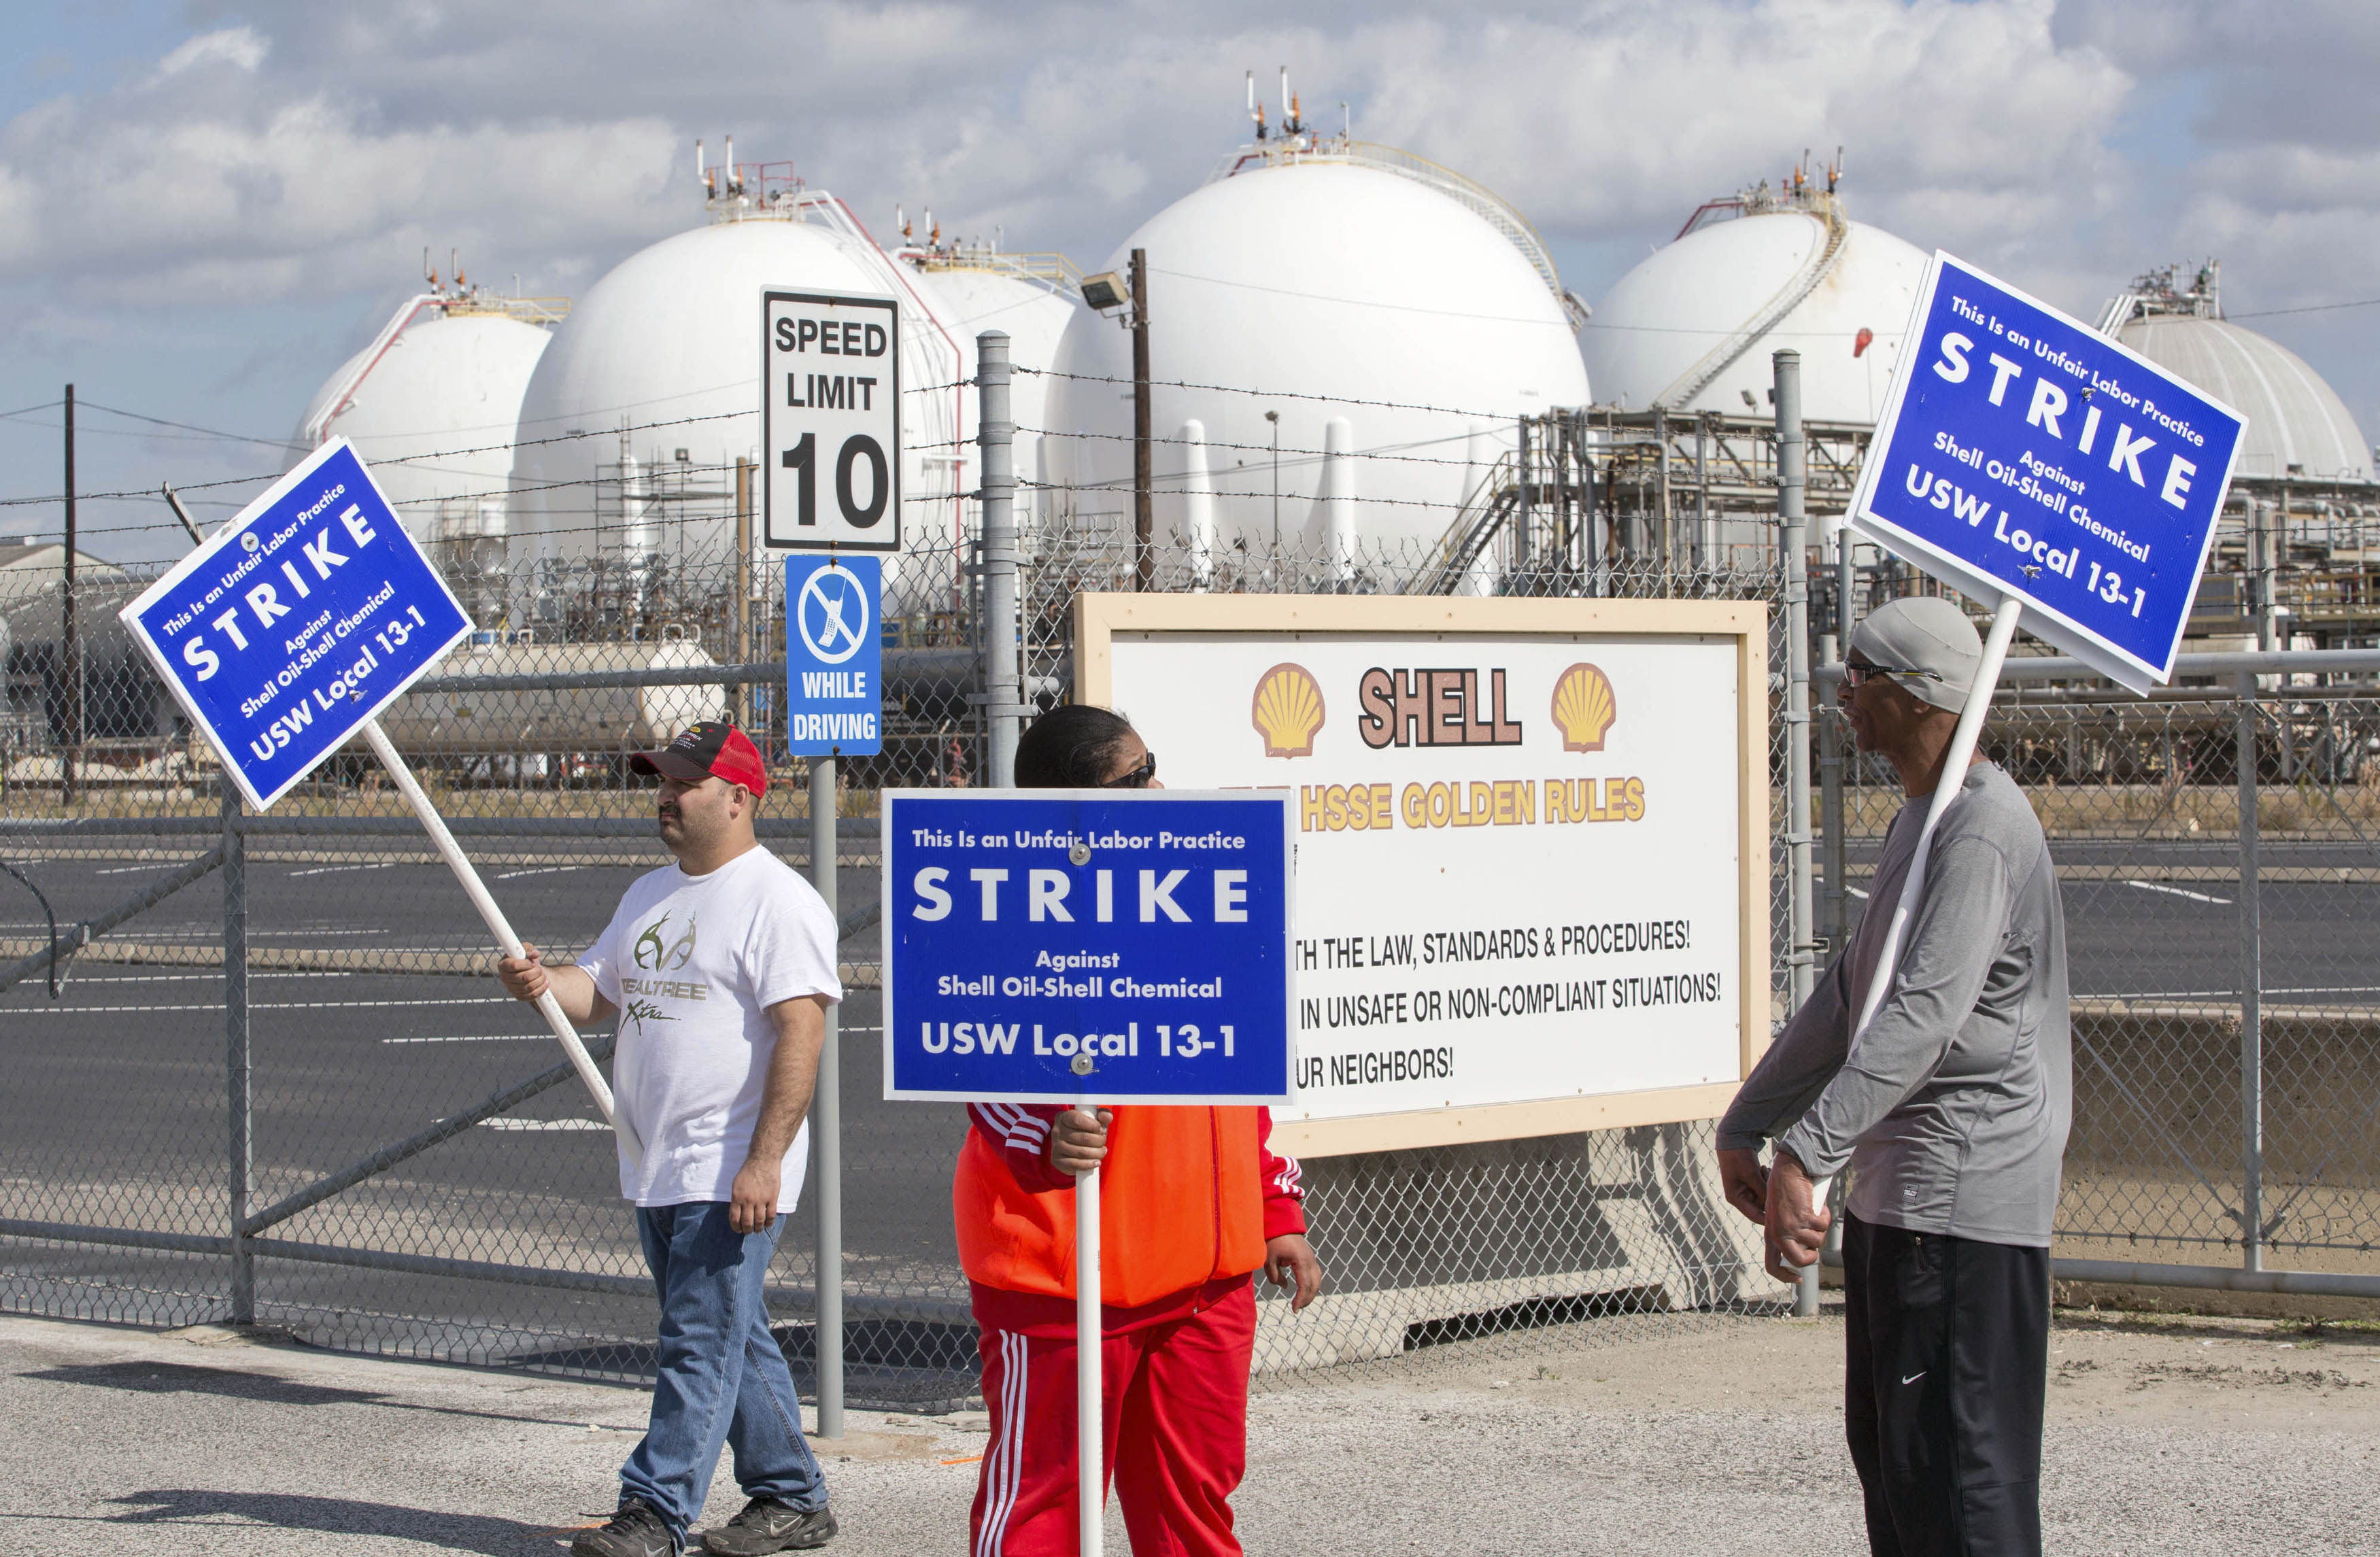 Workers from the USW union walk a picket line outside the Shell Oil Deer Park Refinery in Deer Park, Texas